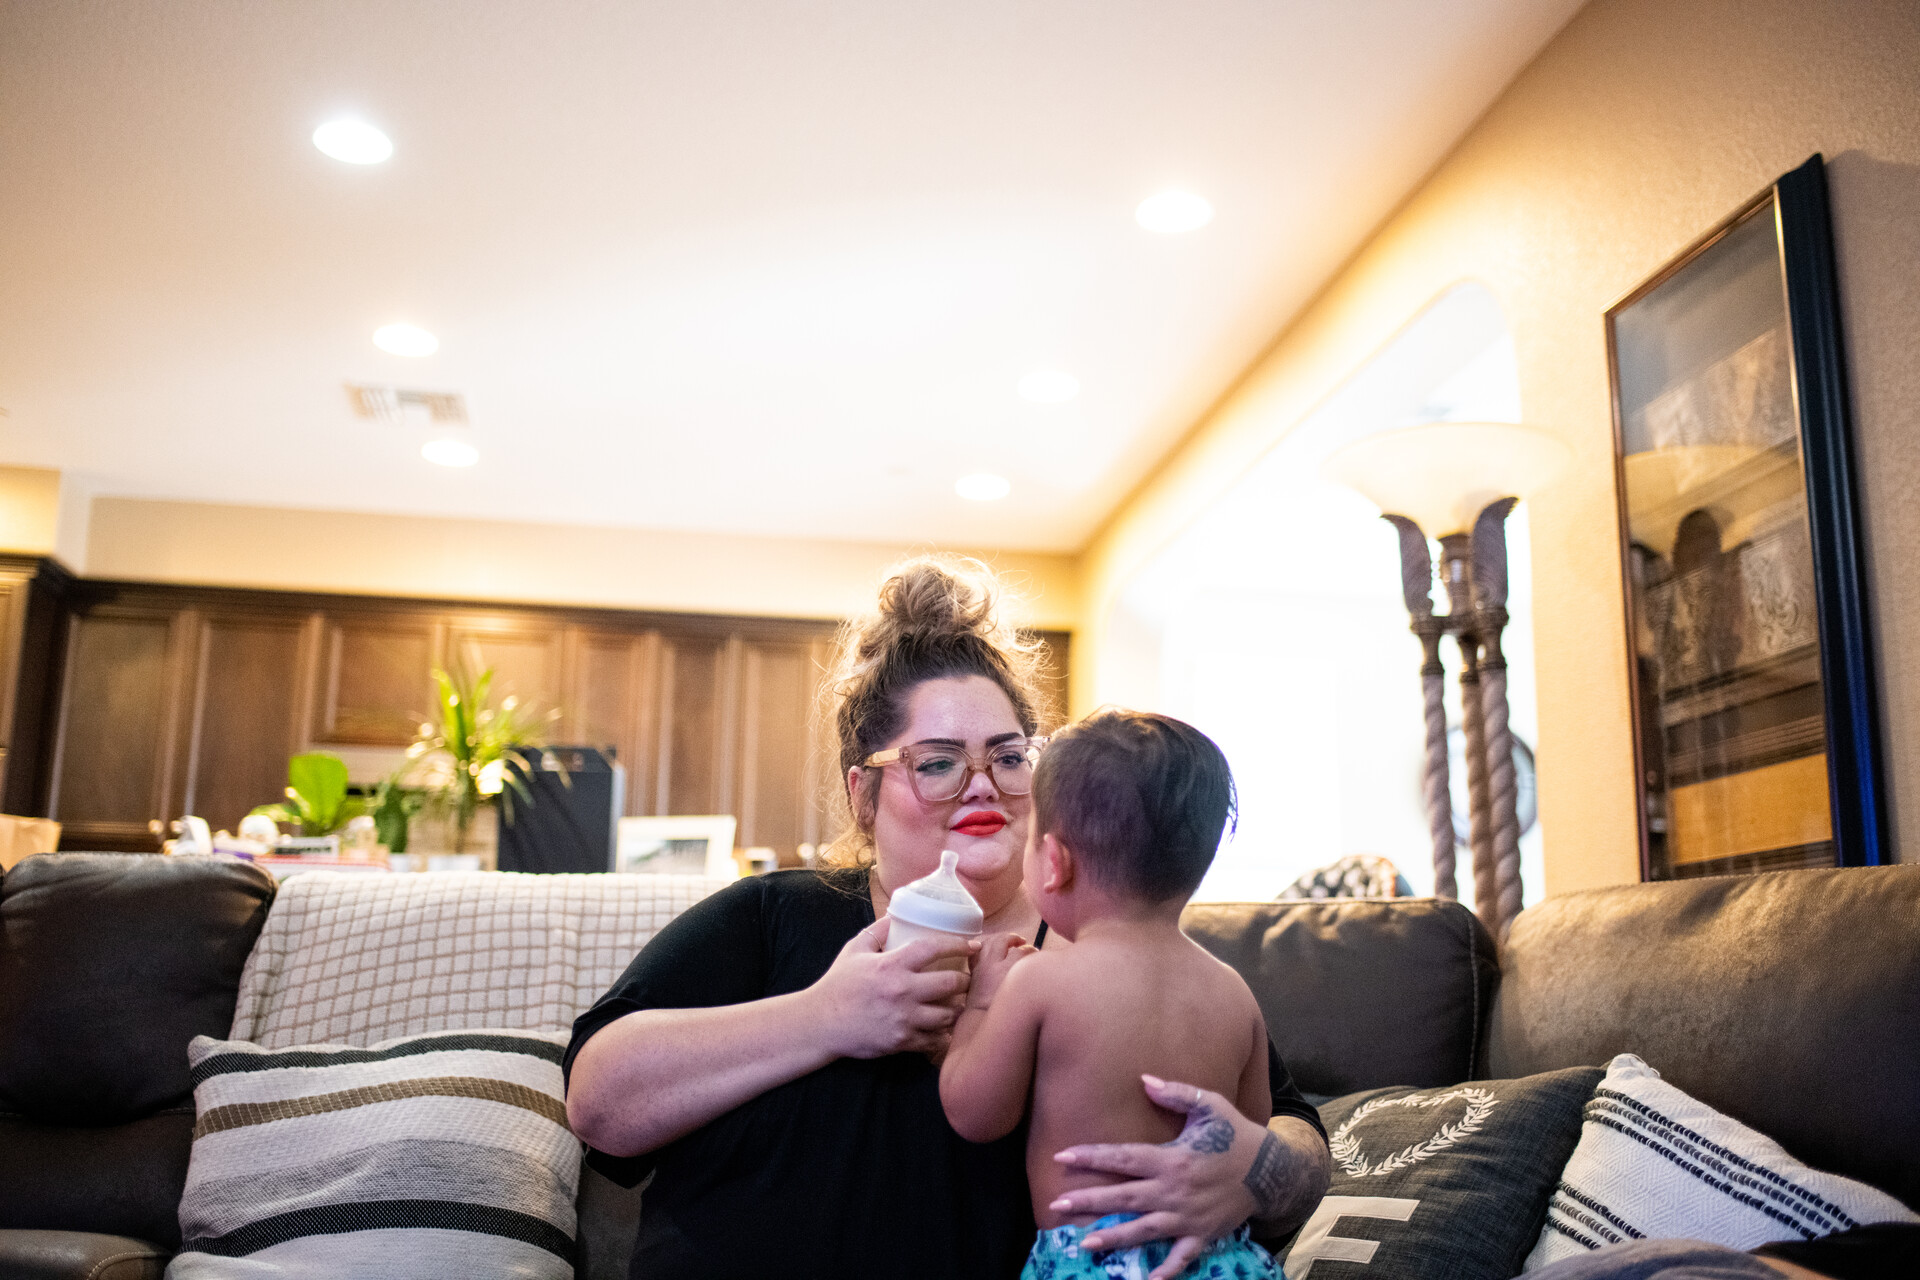 A parent carries a baby in one hand and a baby bottle in the other. The parent is sitting on a big, brown couch in the living room of their house.